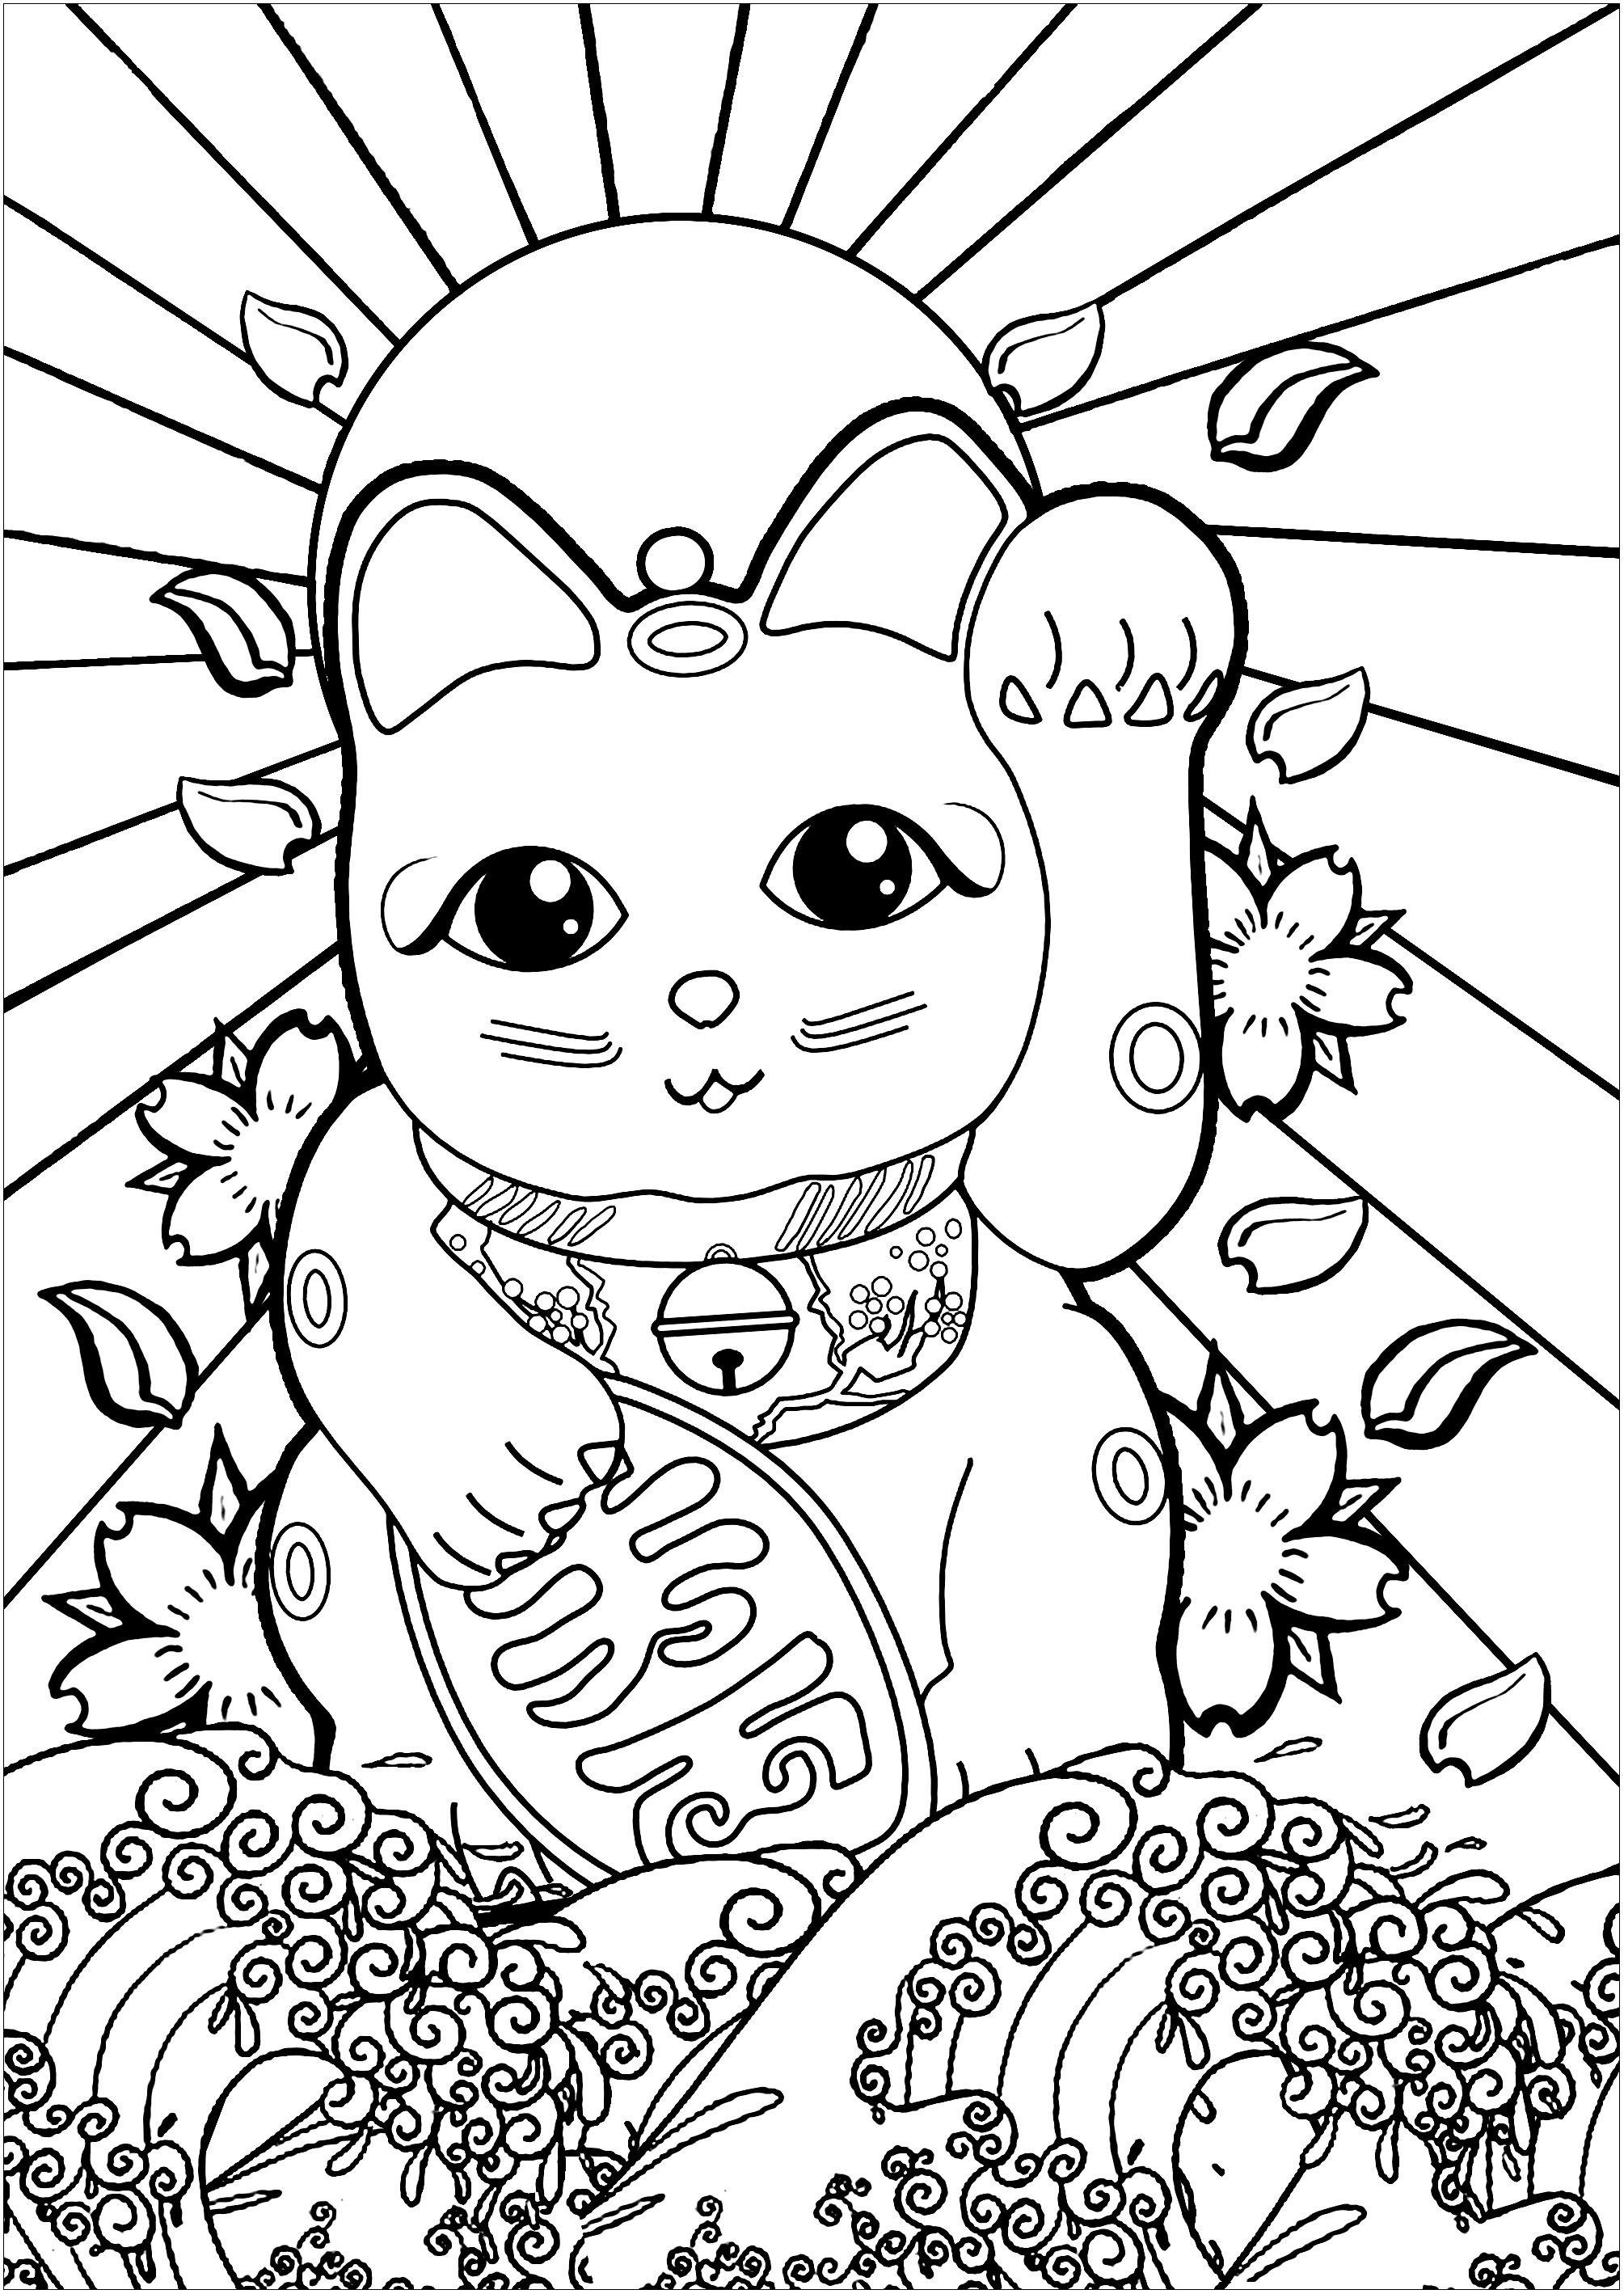 Download Maneki Neko and The Great Wave - Japan Adult Coloring Pages